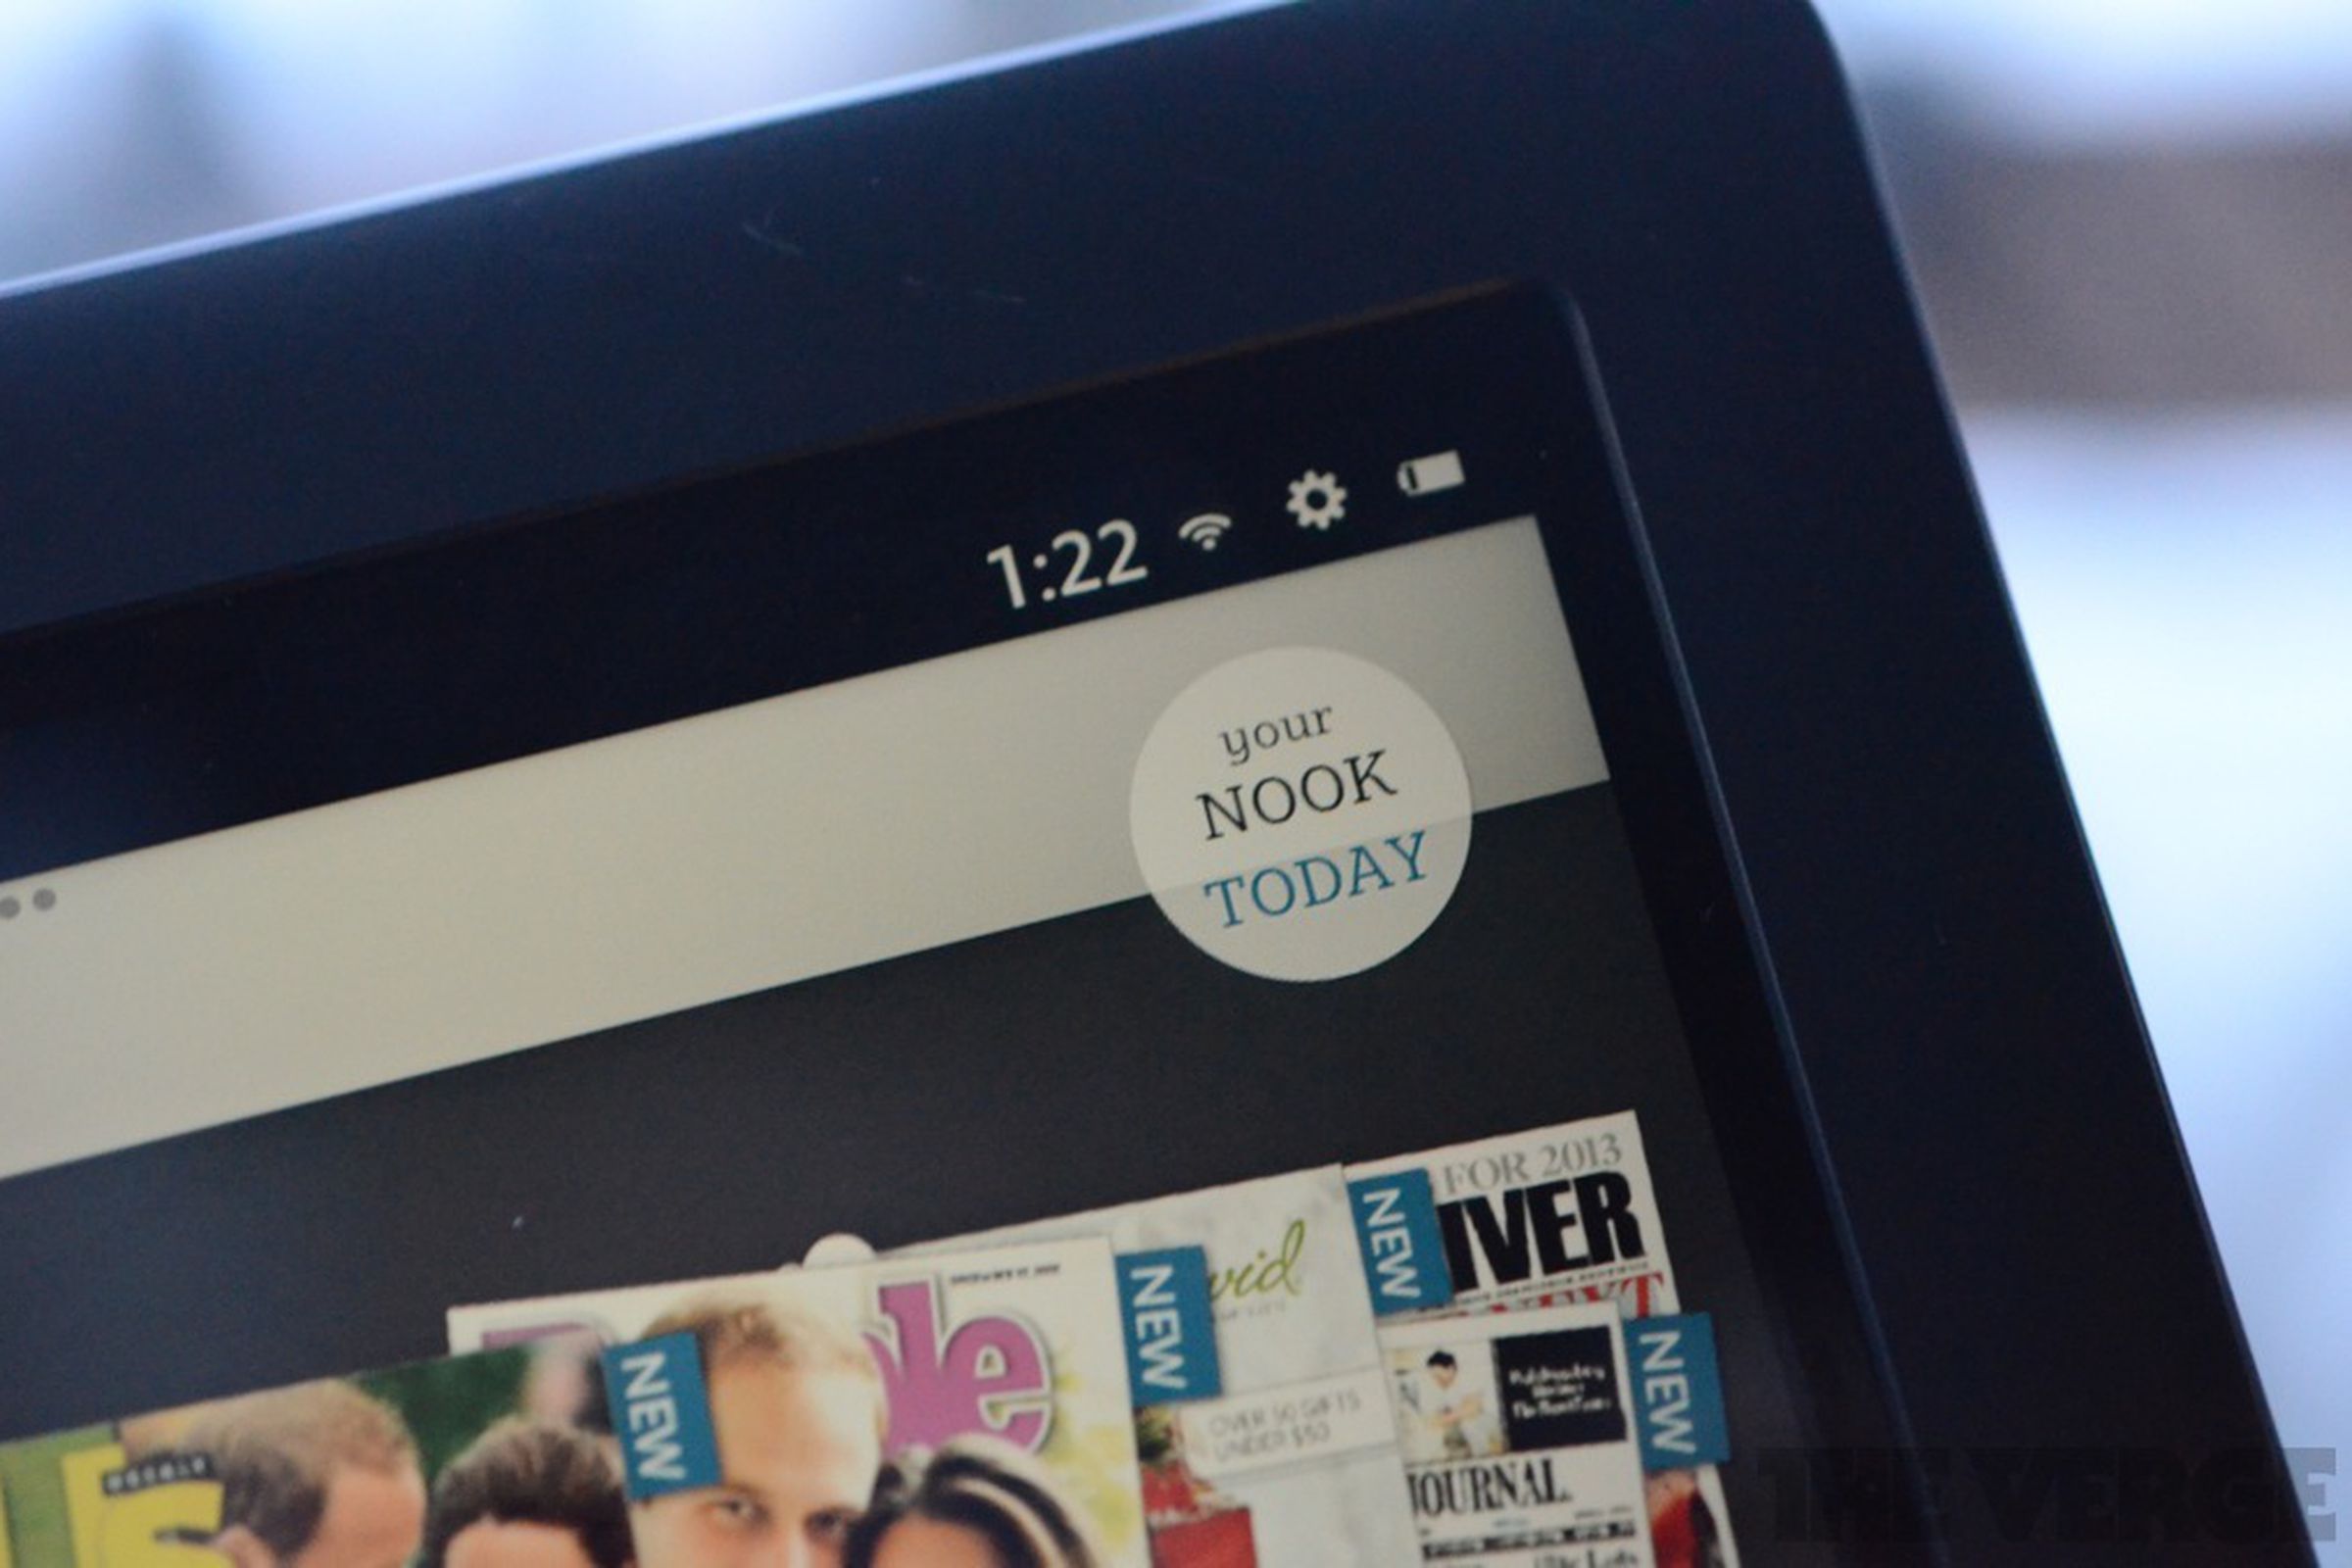 Gallery Photo: Barnes & Noble Nook HD+ hands-on pictures